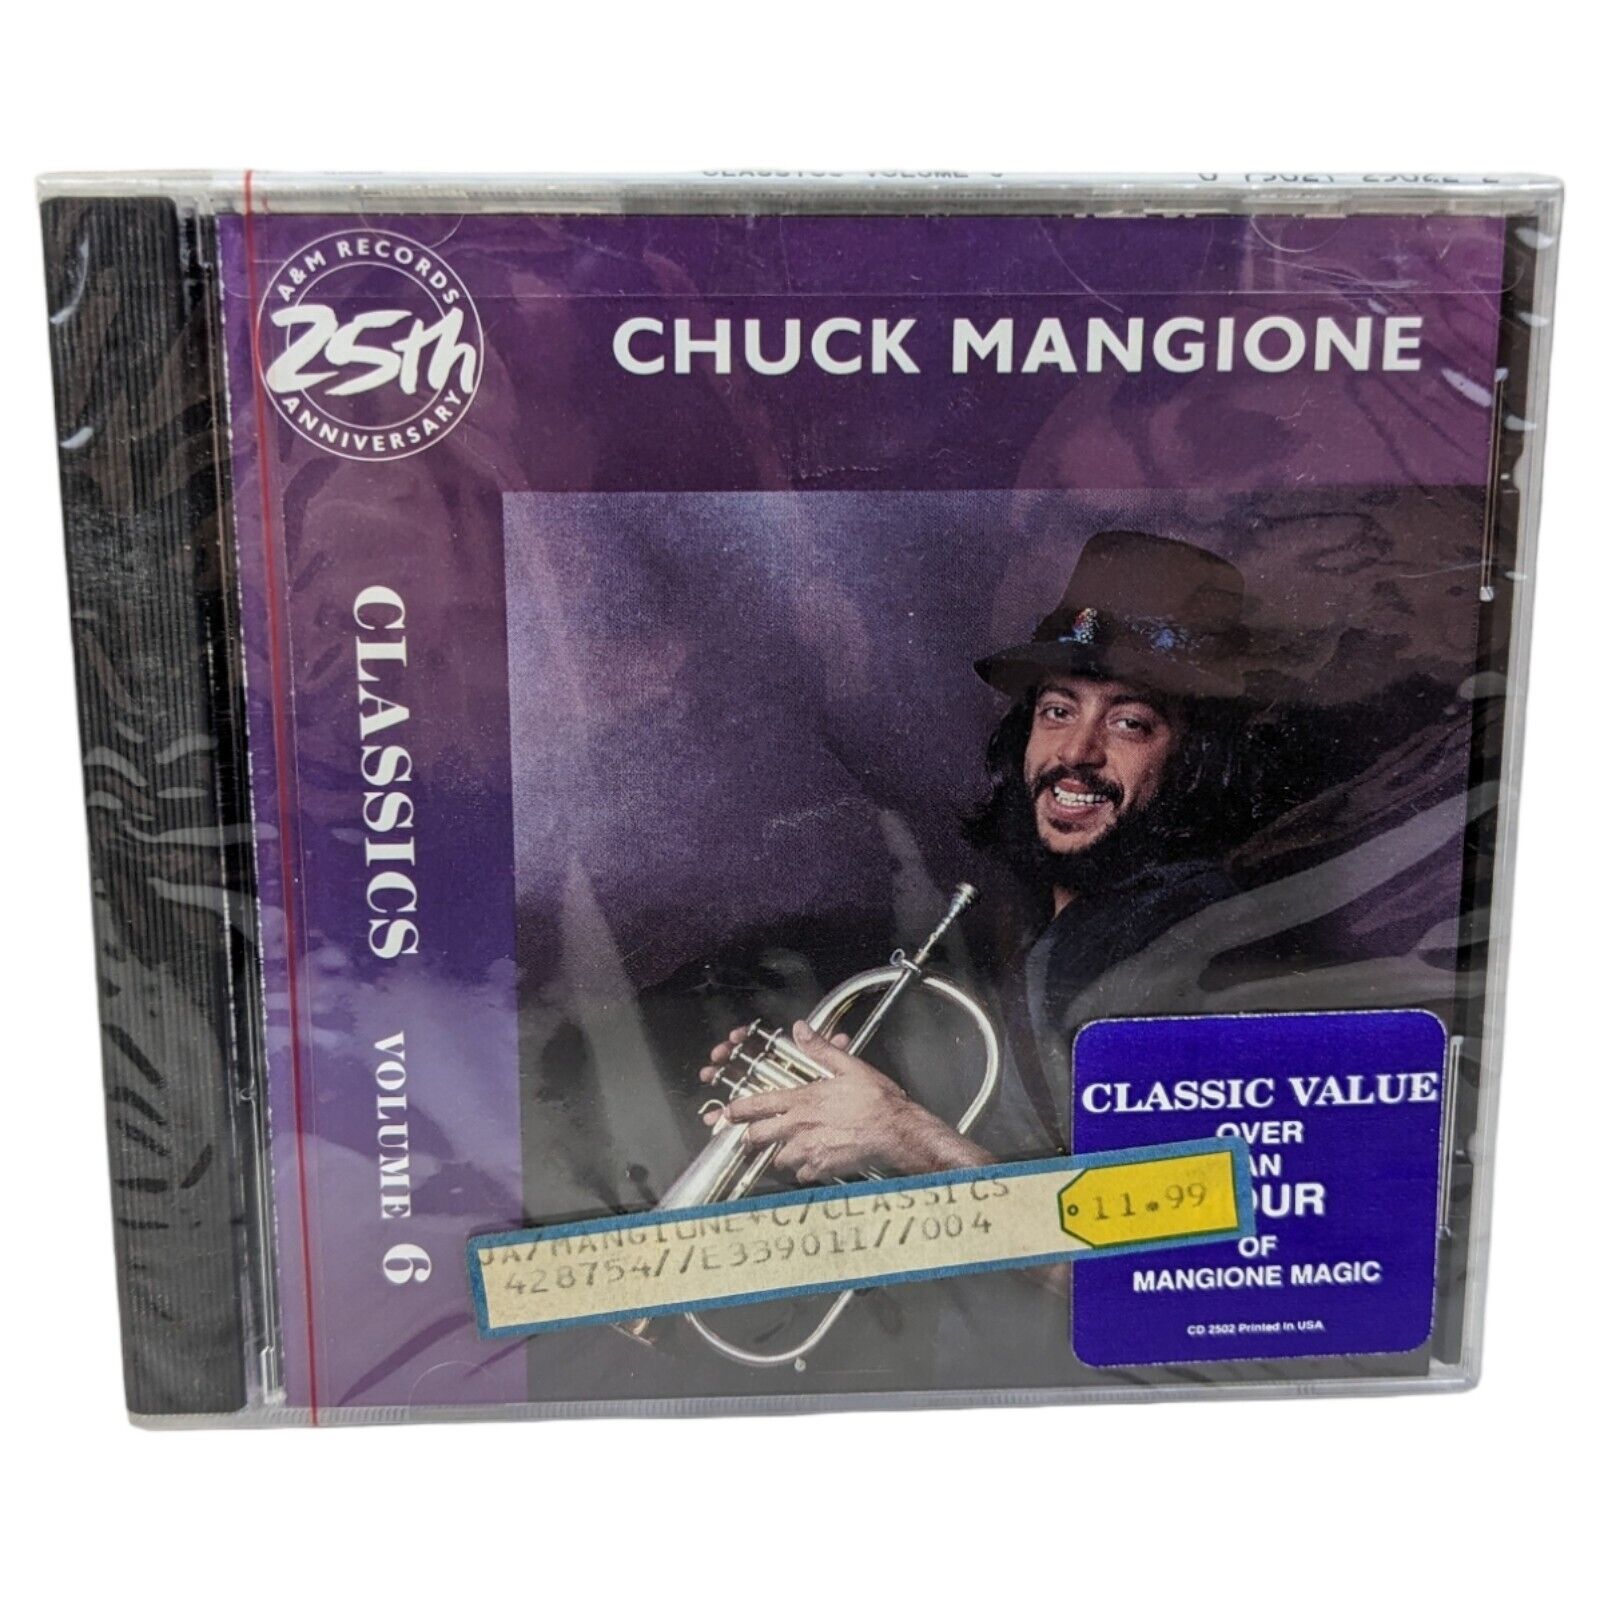 Classics Volume 6 by Chuck Mangione (CD, 1987) New Sealed